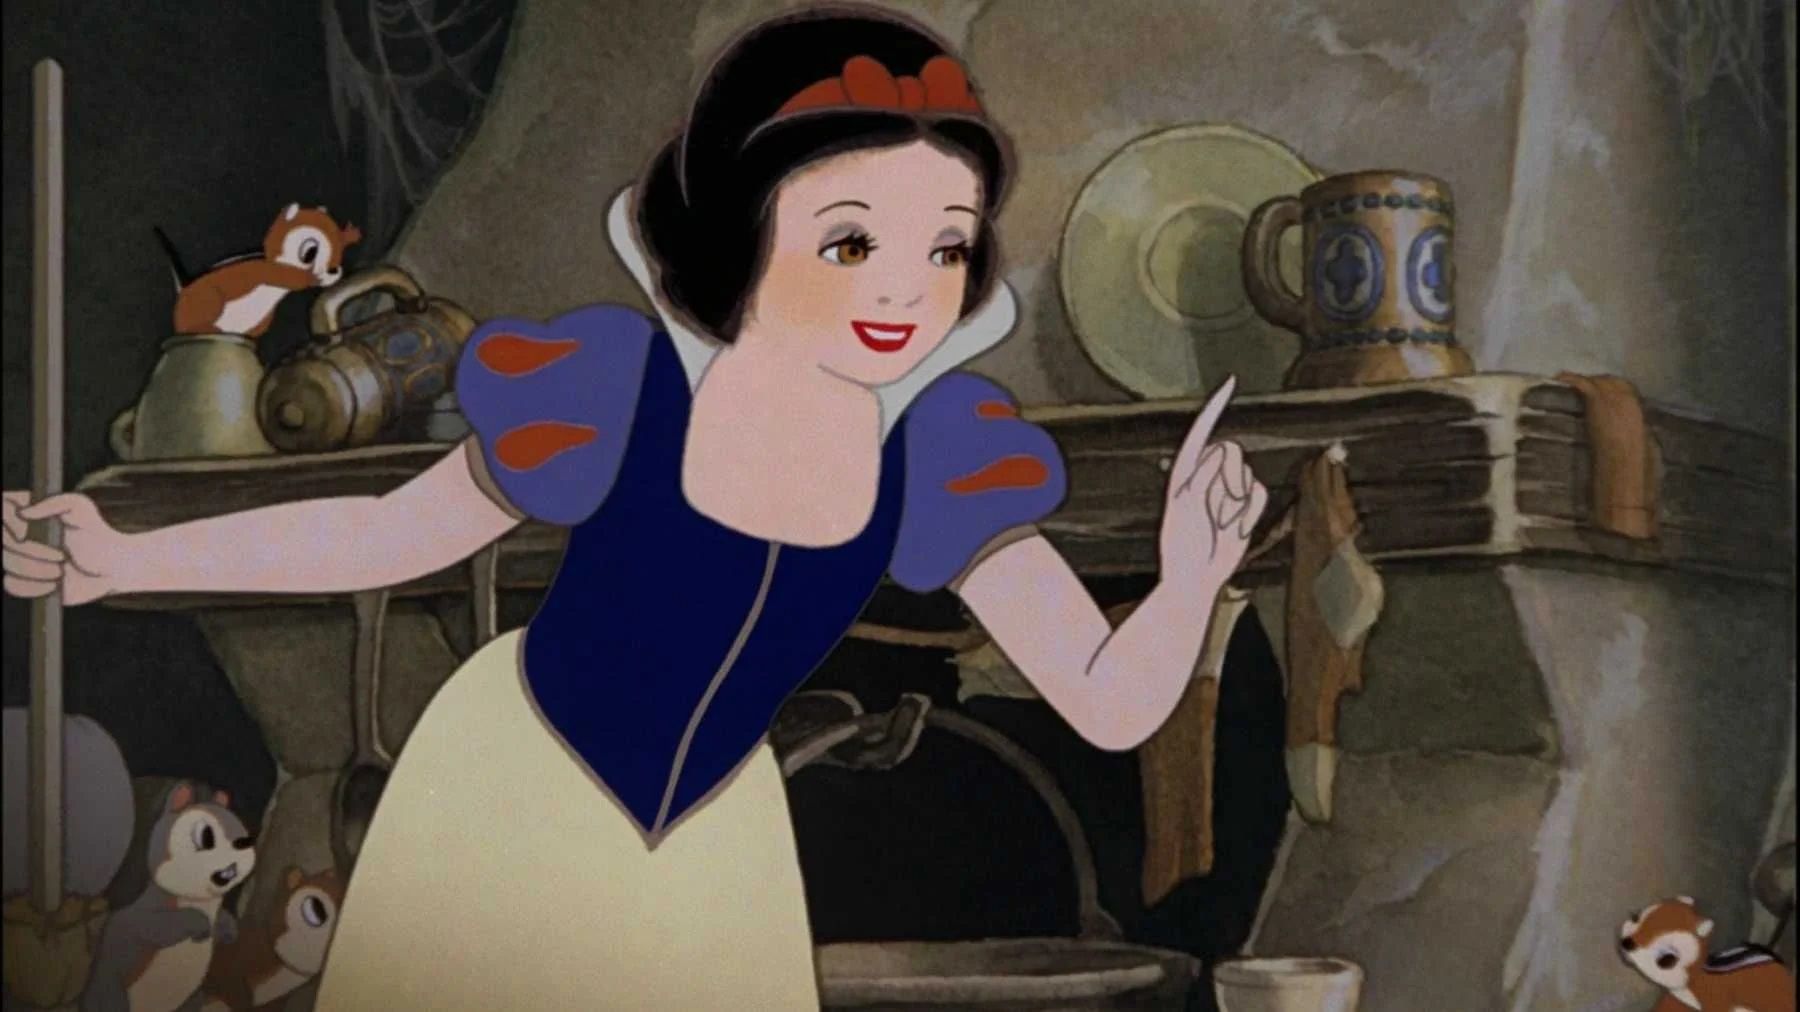 Snow White and her distinctive rosy cheeks